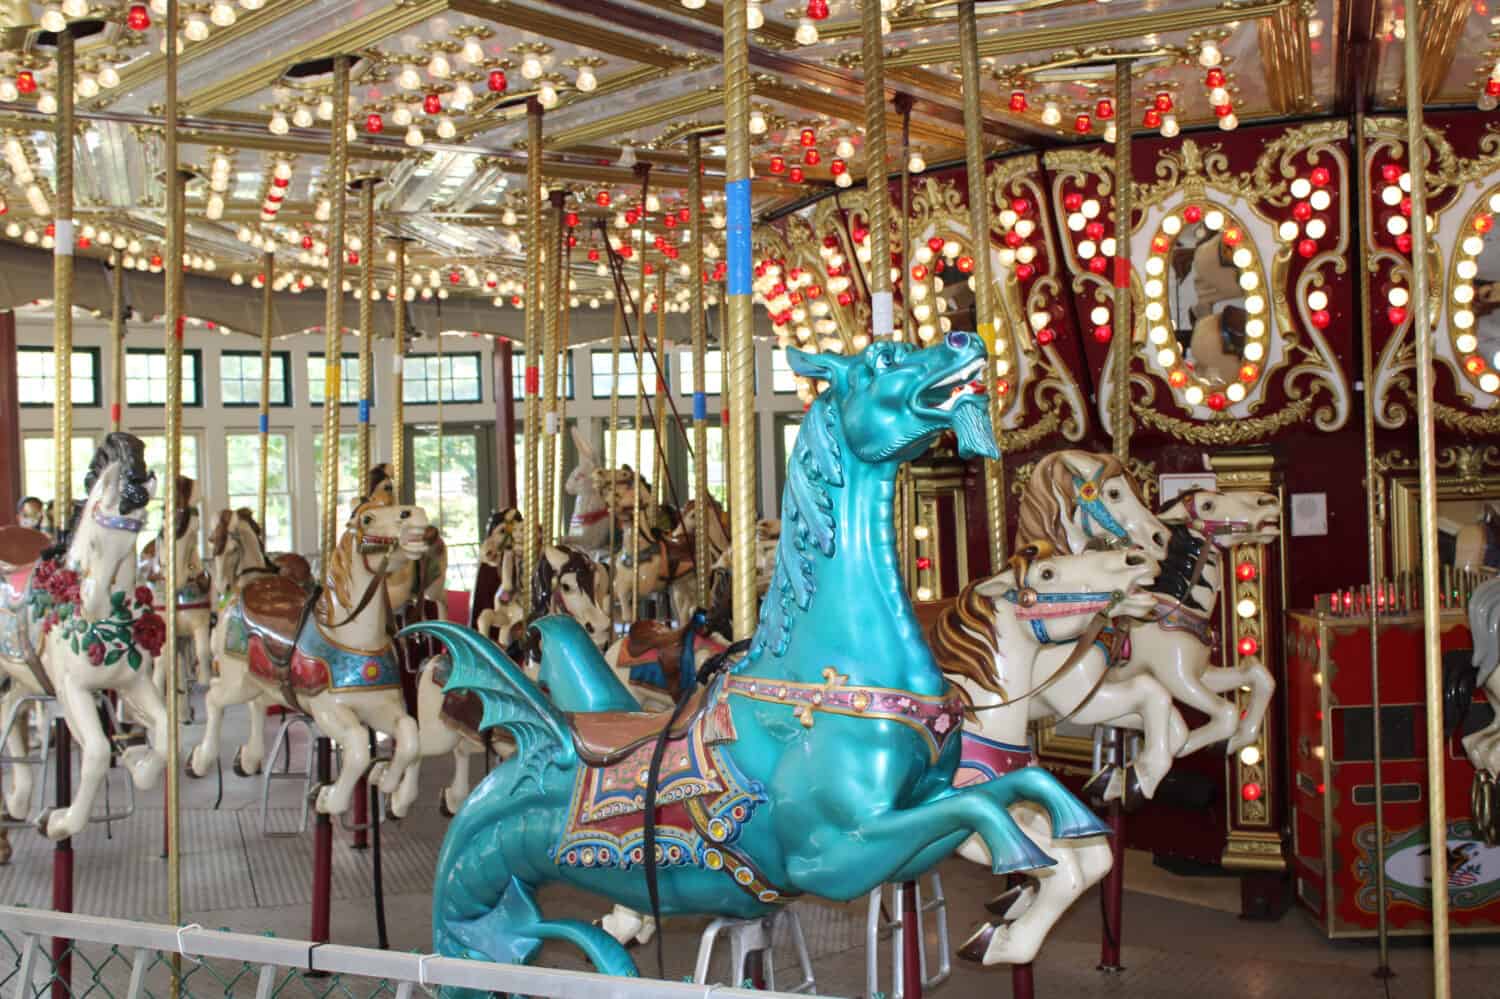 The modern carousel at the Roger Williams park in Providence, Rhode Island. The enclosed joy ride has a blue dragon that's front and center. He's surrounded by gorgeous, trotting, carved horses.